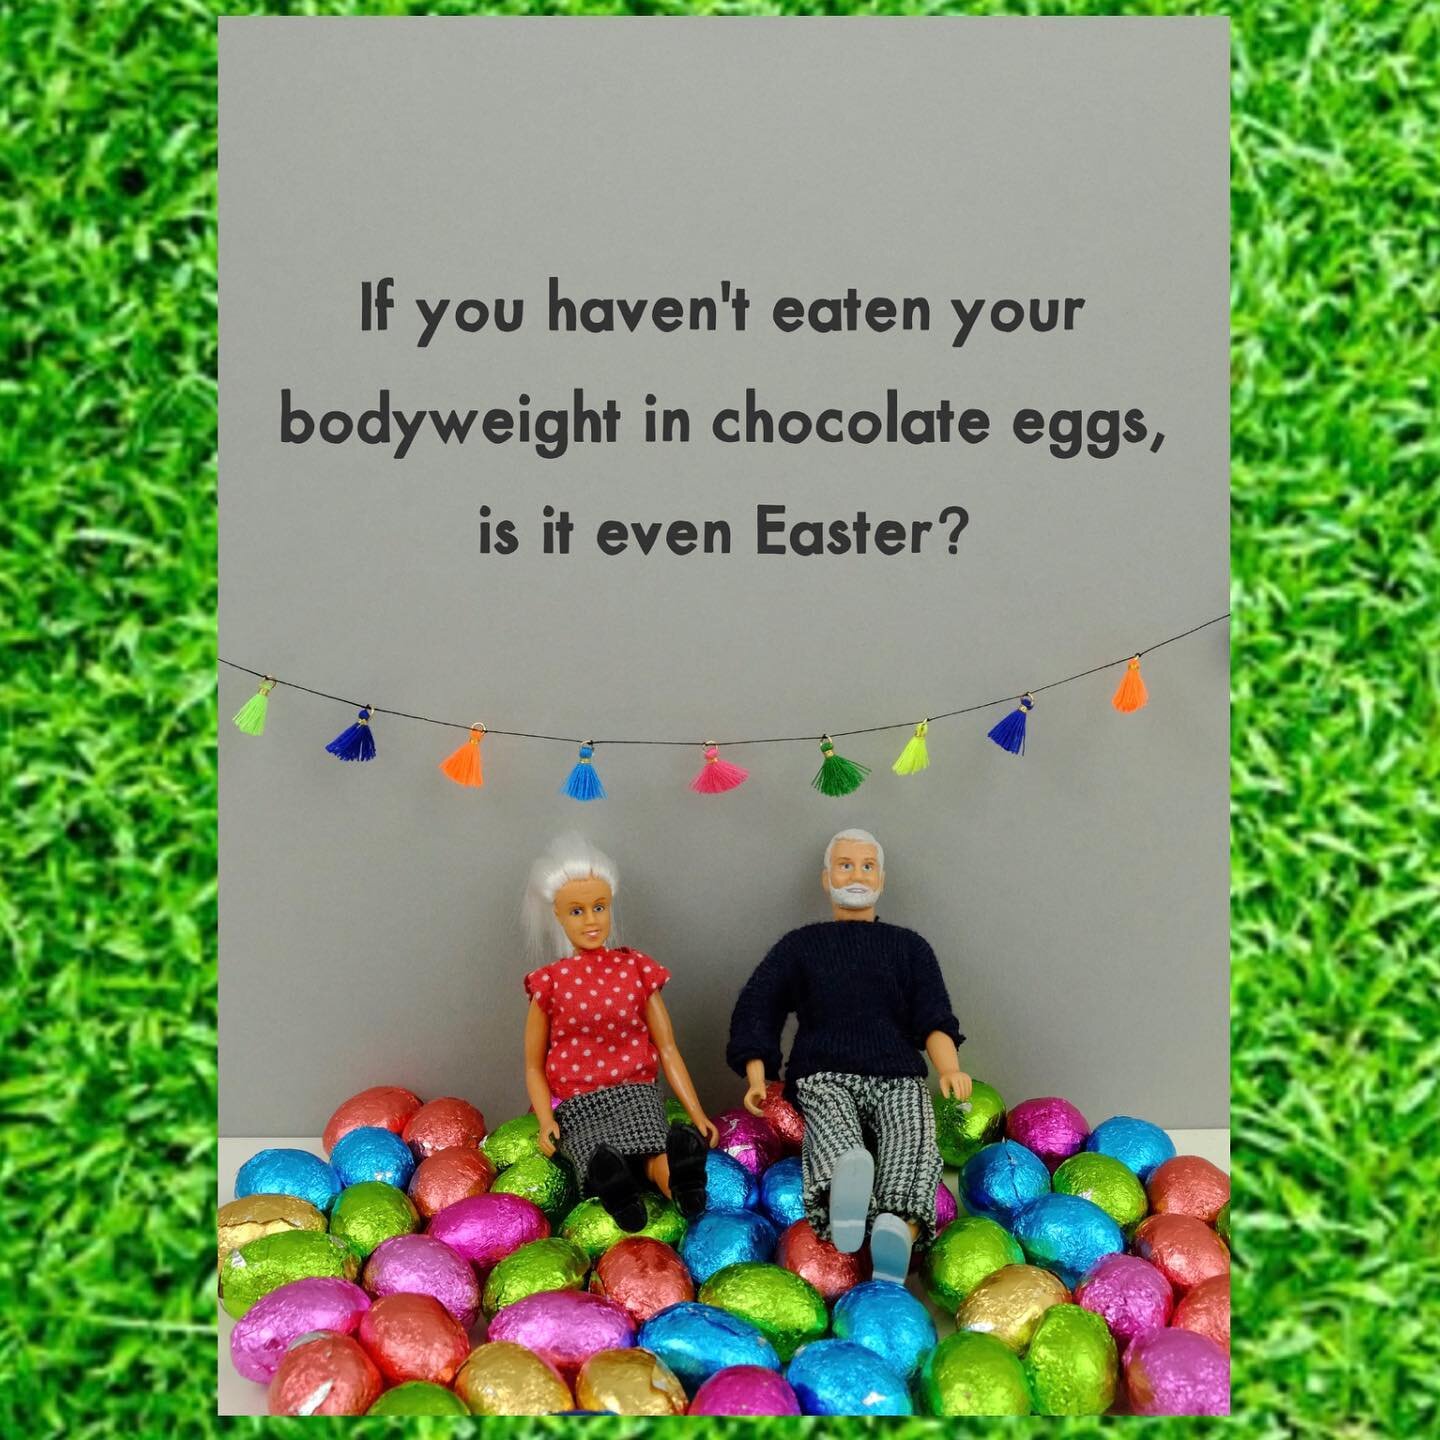 And roast potatoes 😁 and Prosecco 🥂 Happy Easter 🐇🐣

#easterweekend #easter #prosecco #chocolate #minieggs #sunshine #fun #longweekend #lazydays #eastereggs #funny #silly #humour #humor #thortfulcards #greetingcards #funnygreetingcards #wholesale